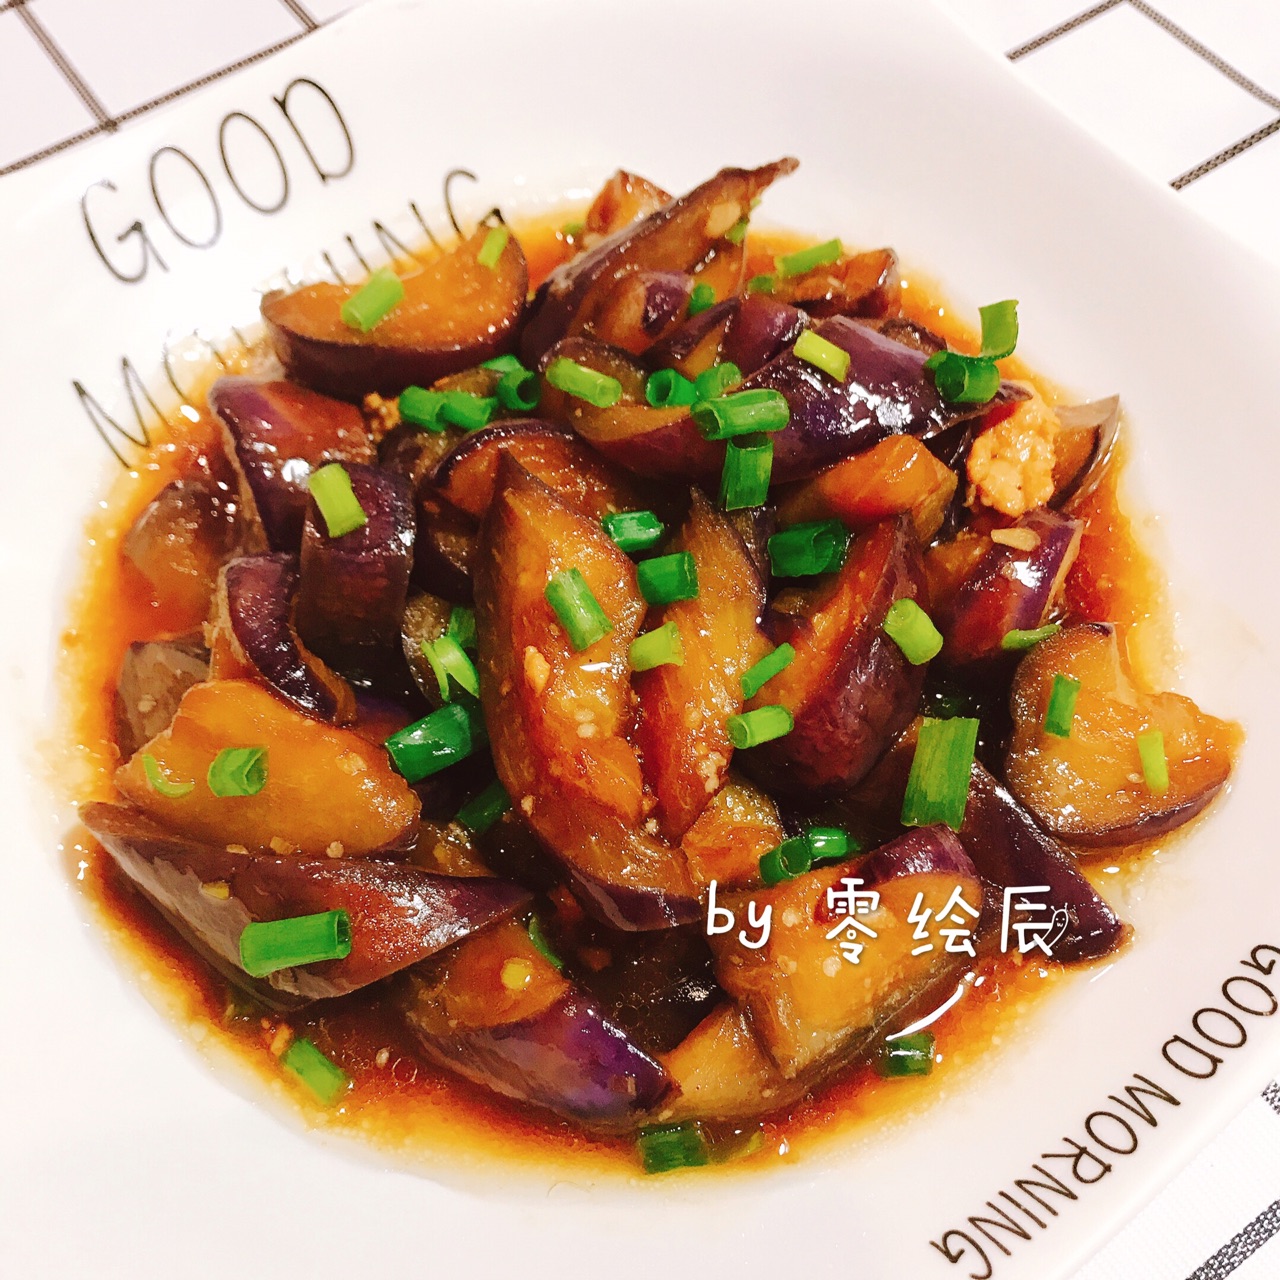 Transfer the braised eggplant to a serving dish